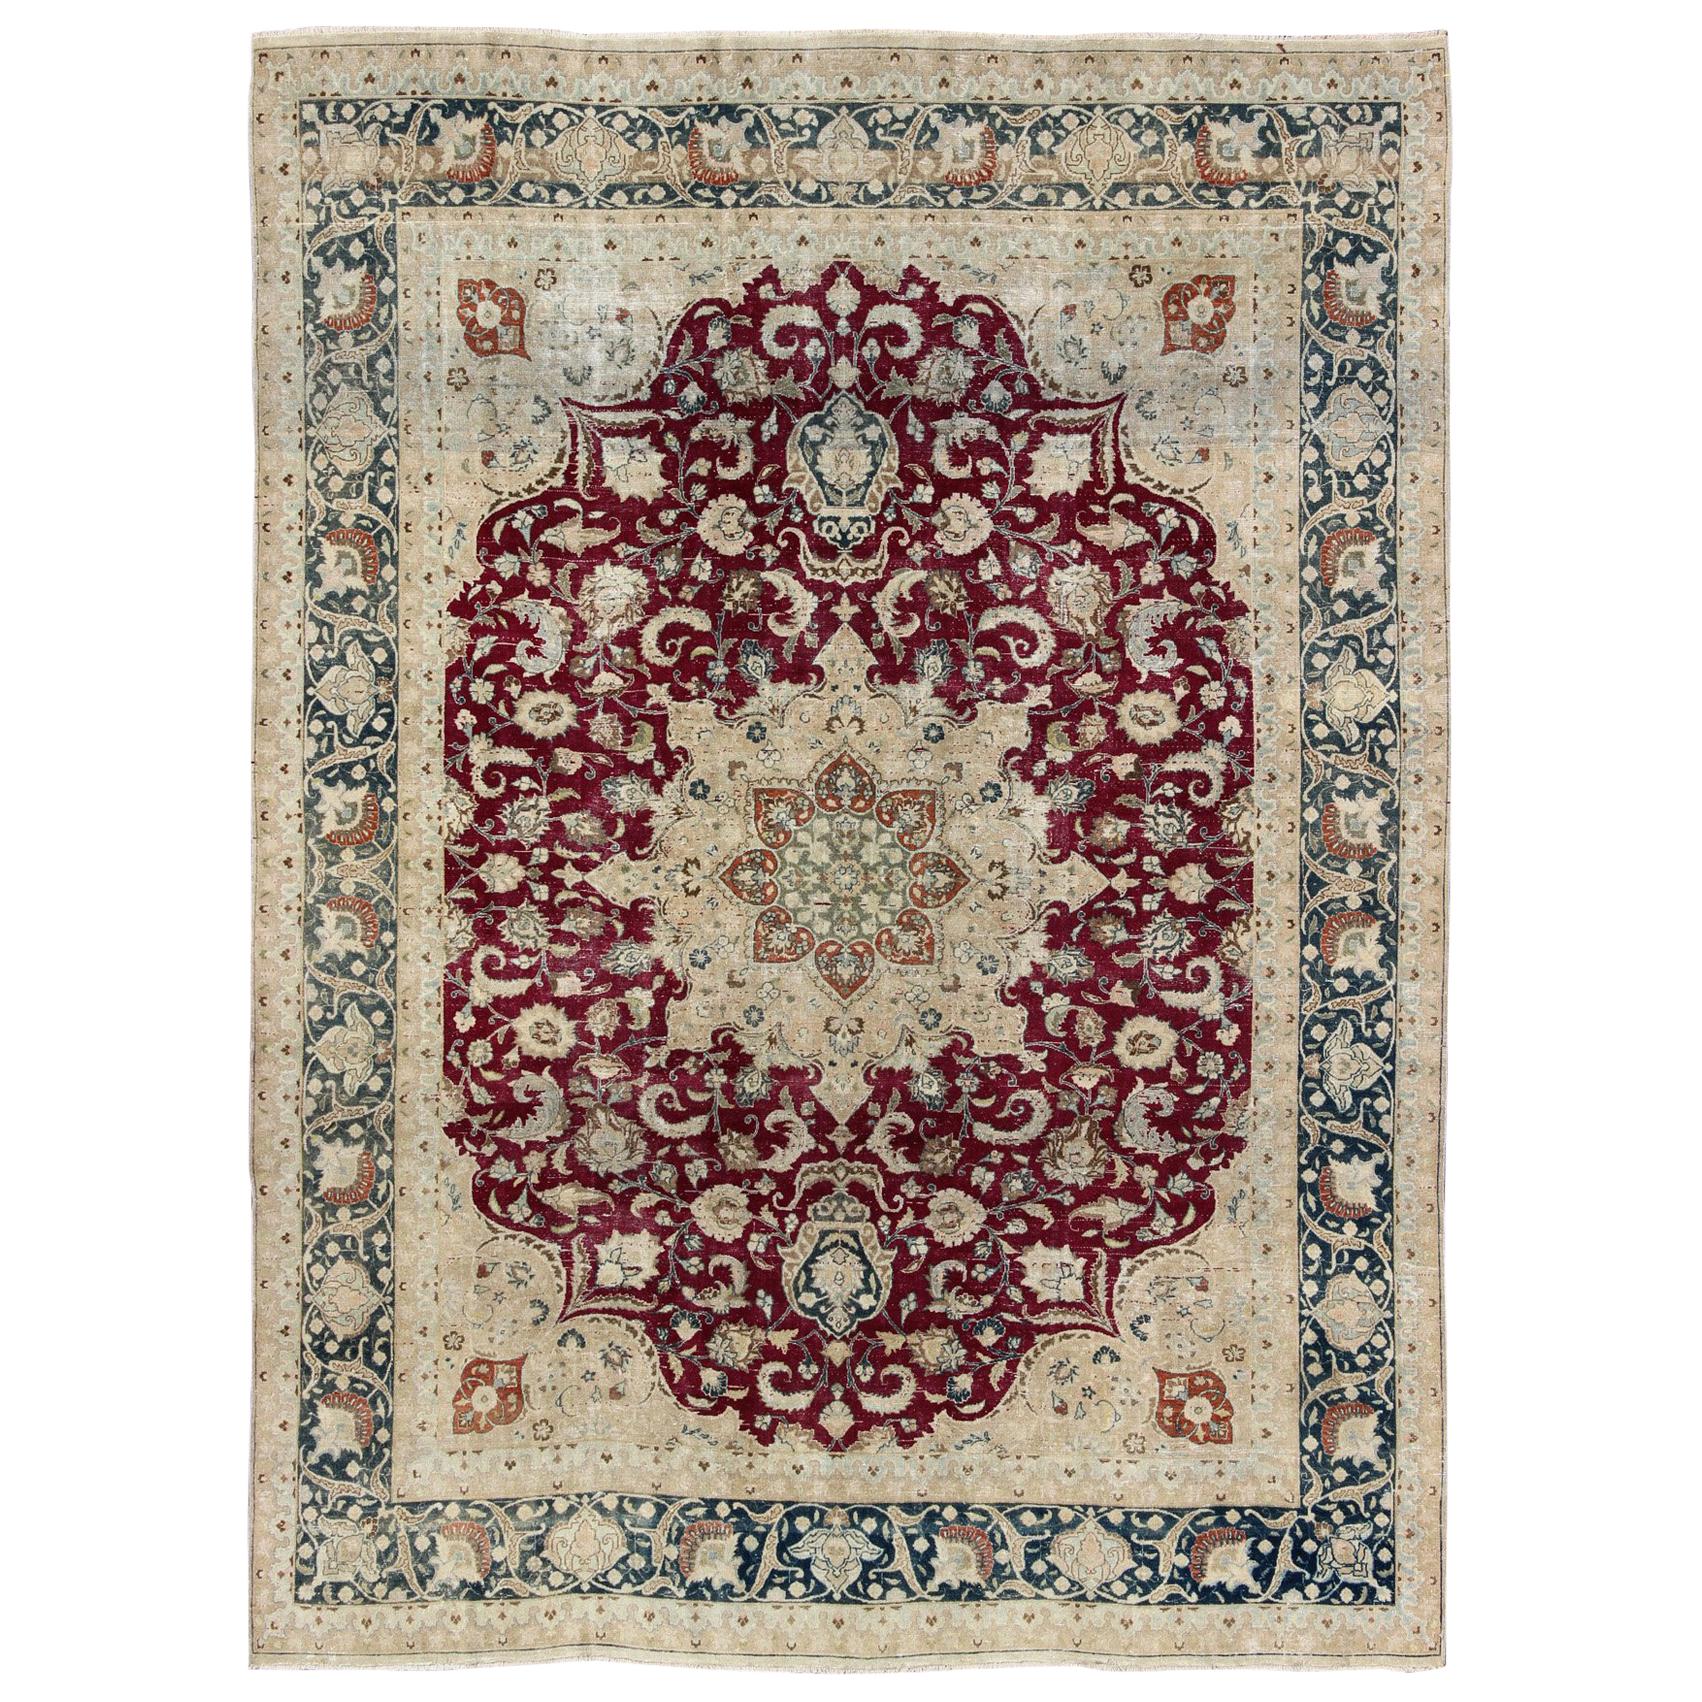 Layered Floral Medallion Antique Persian Mashad Rug in Red, Steel Blue and Cream For Sale